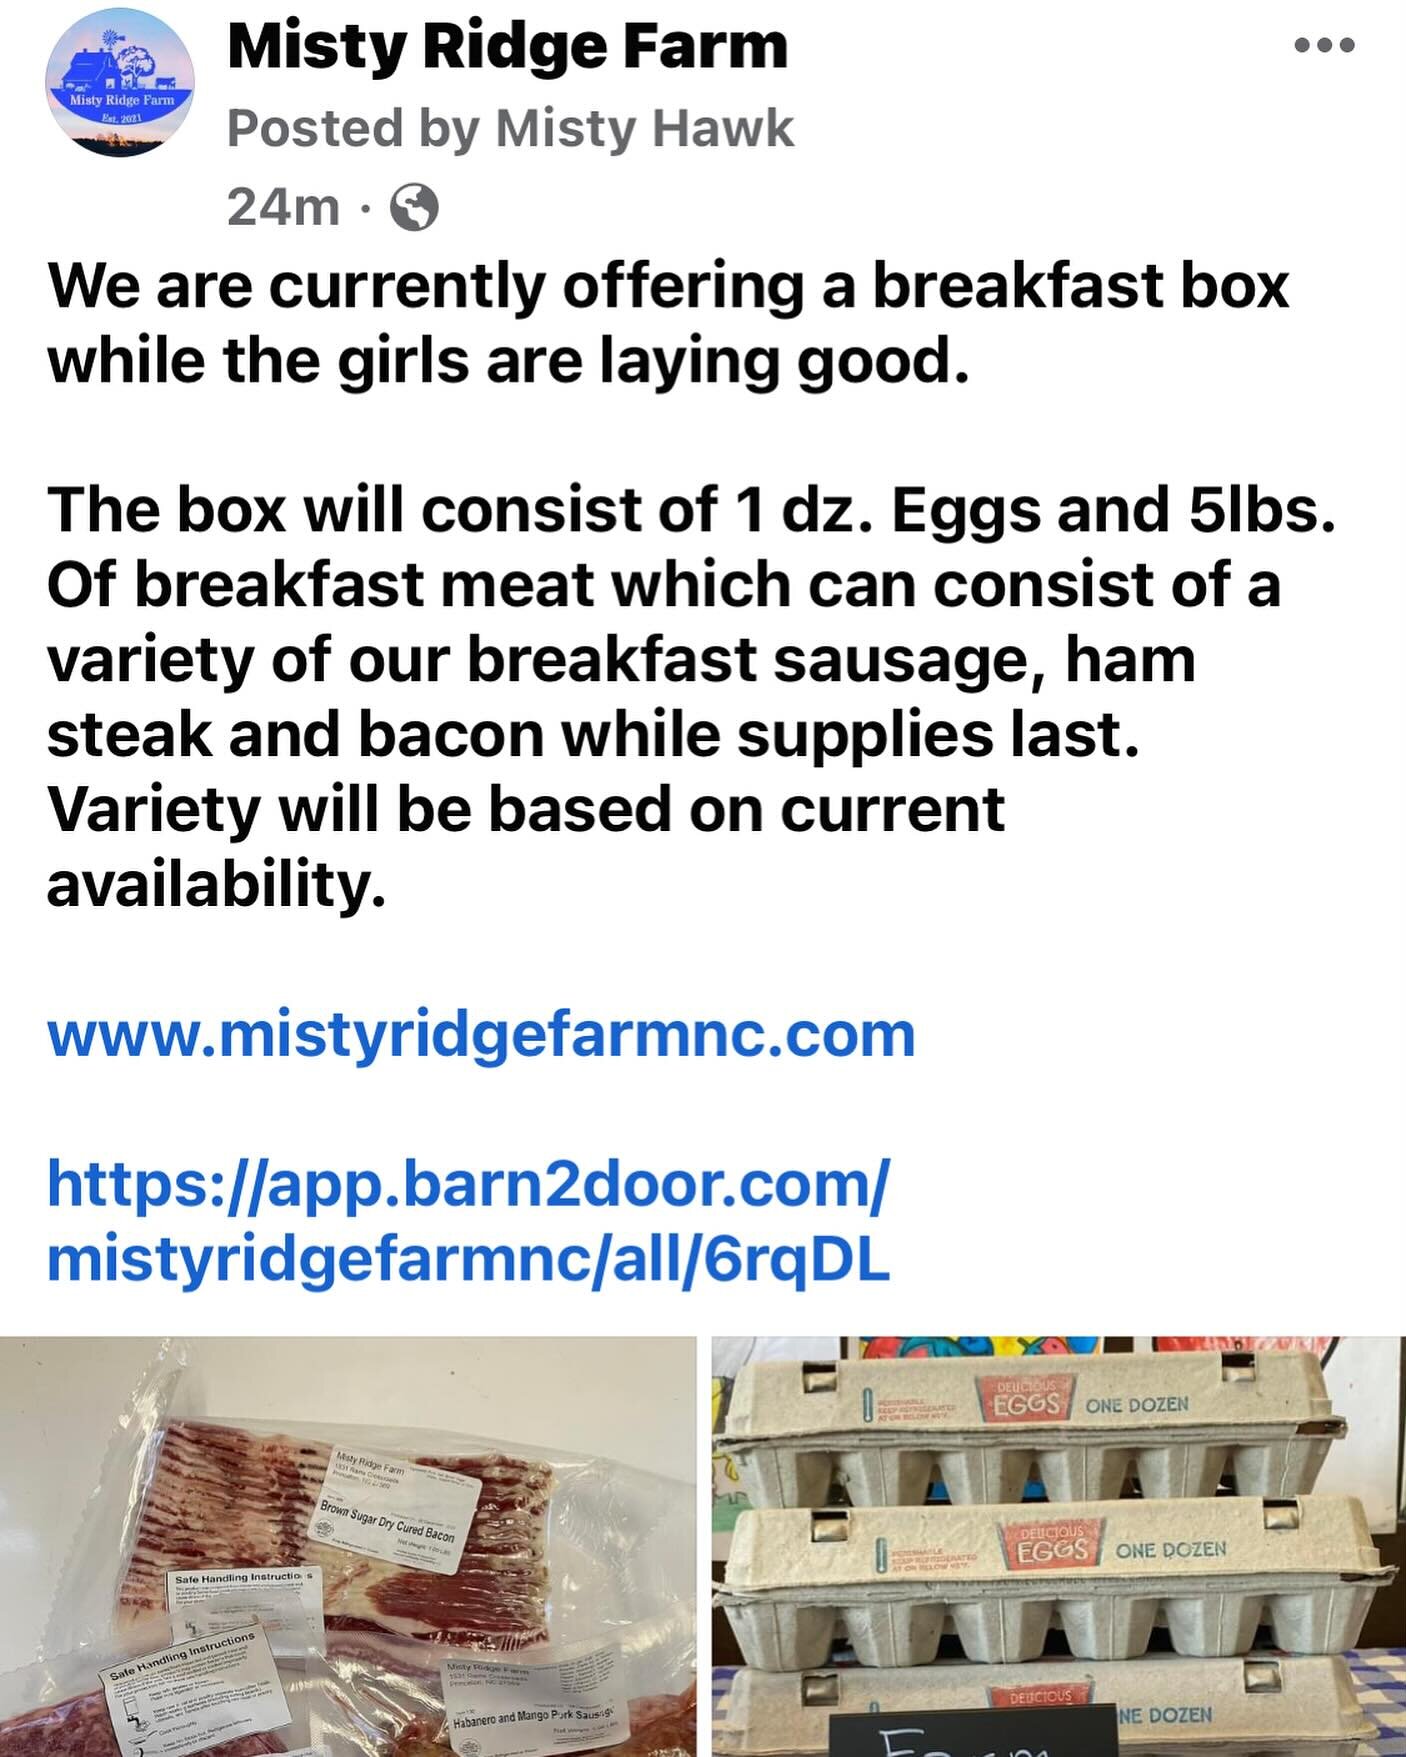 NEW ADDITION to our store.  Breakfast bundle consisting of 1 dz. Eggs, 5 lbs of breakfast meat.  Breakfast meat can consist of sausages, ham steak and/or bacon based availability.  www.mistyridgefarmnc.com